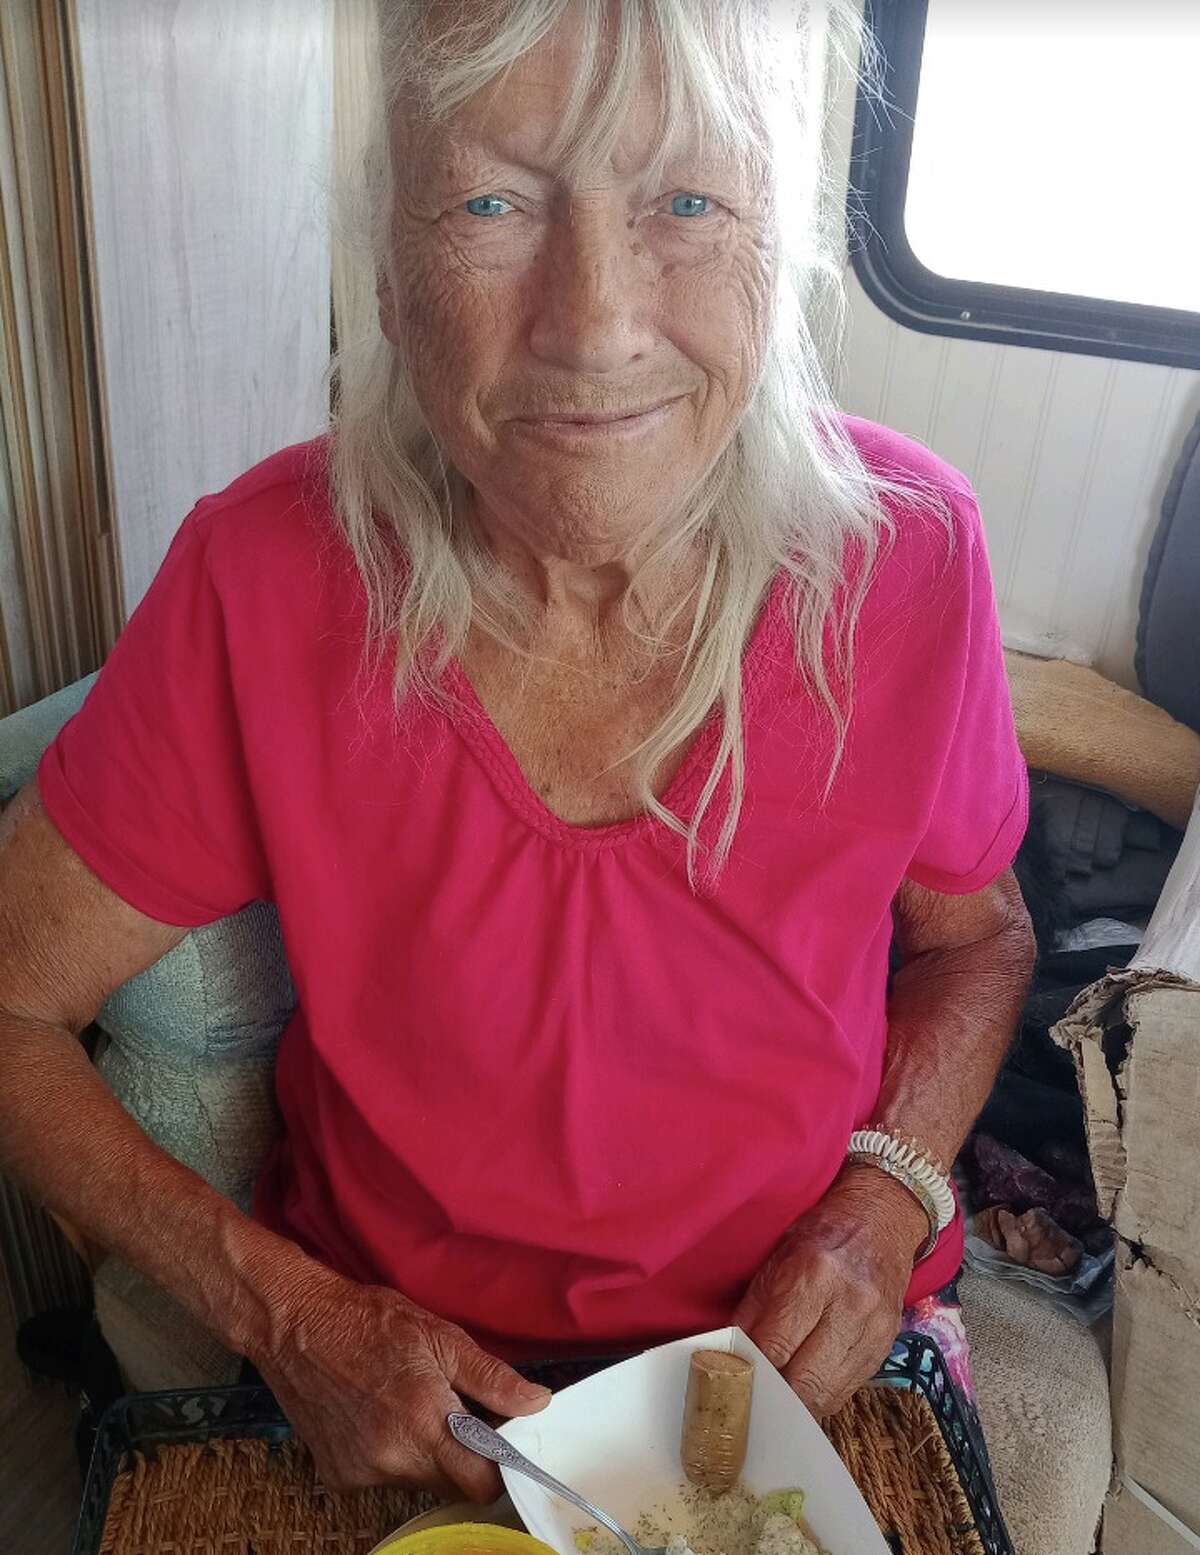 Nancy Holland, 85, was last seen in Midland on June 21 and located Friday, according to the MPD's Facebook page.